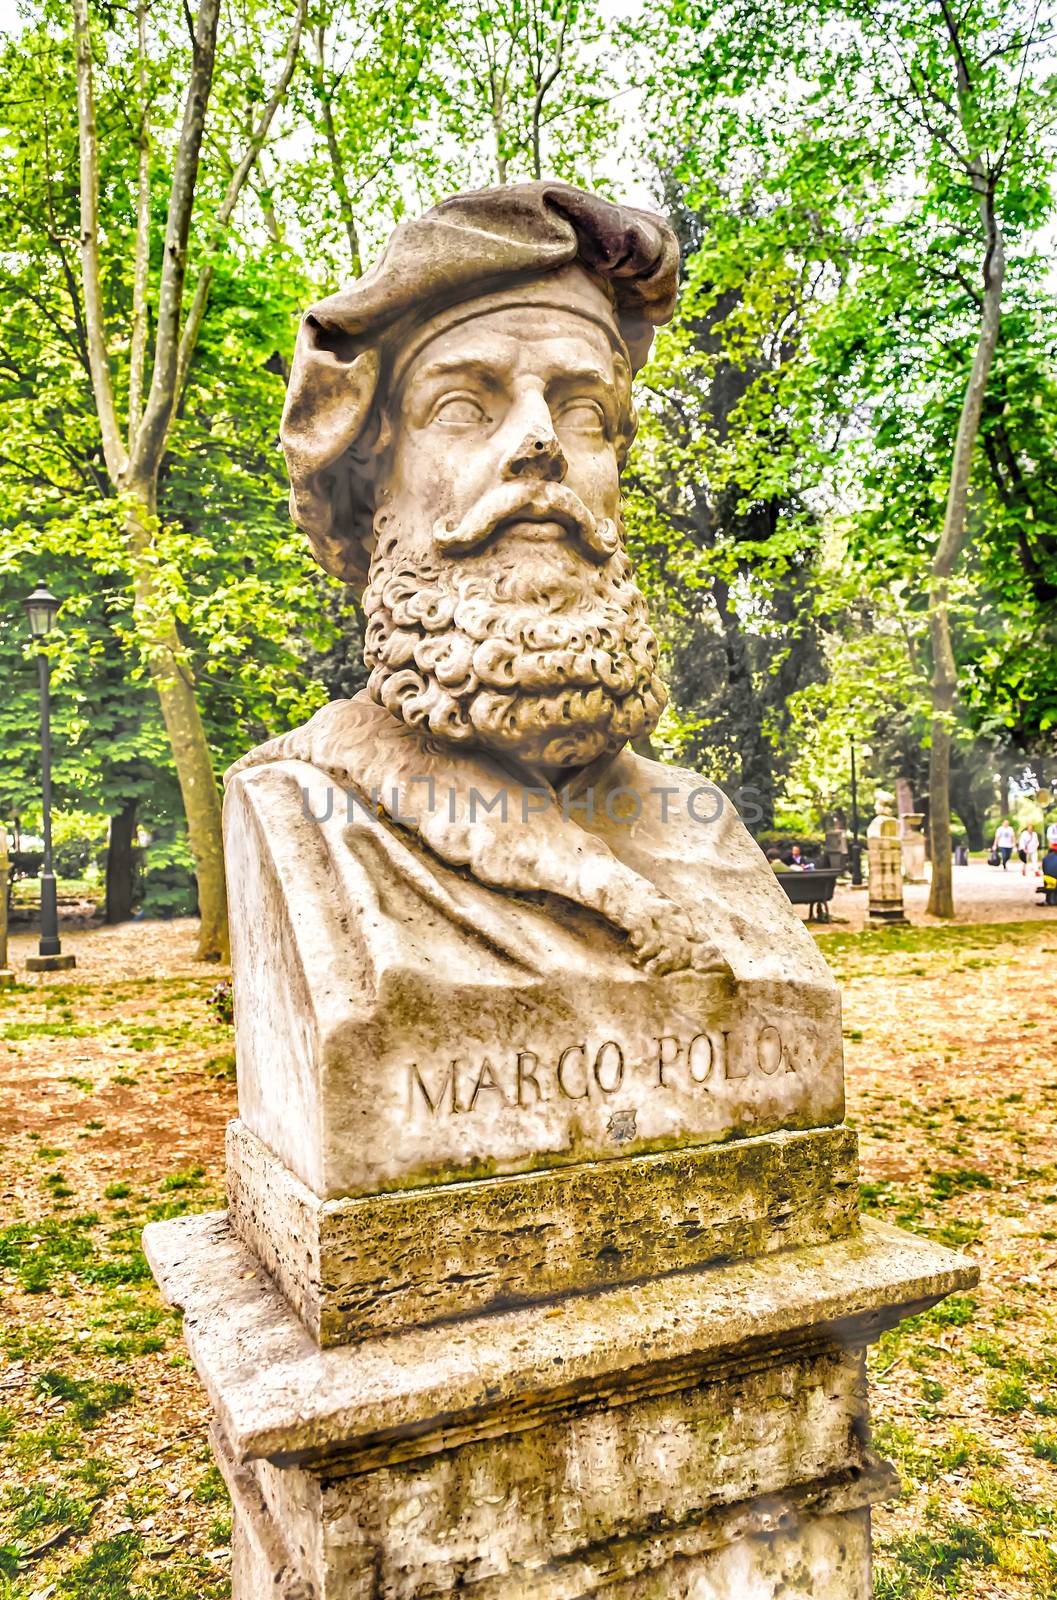 Bust statue of Marco Polo (September 15, 1254 – January 8–9, 1324) who was a legendary Venetian merchant traveller. Sculpture in Villa Borghese park, Rome